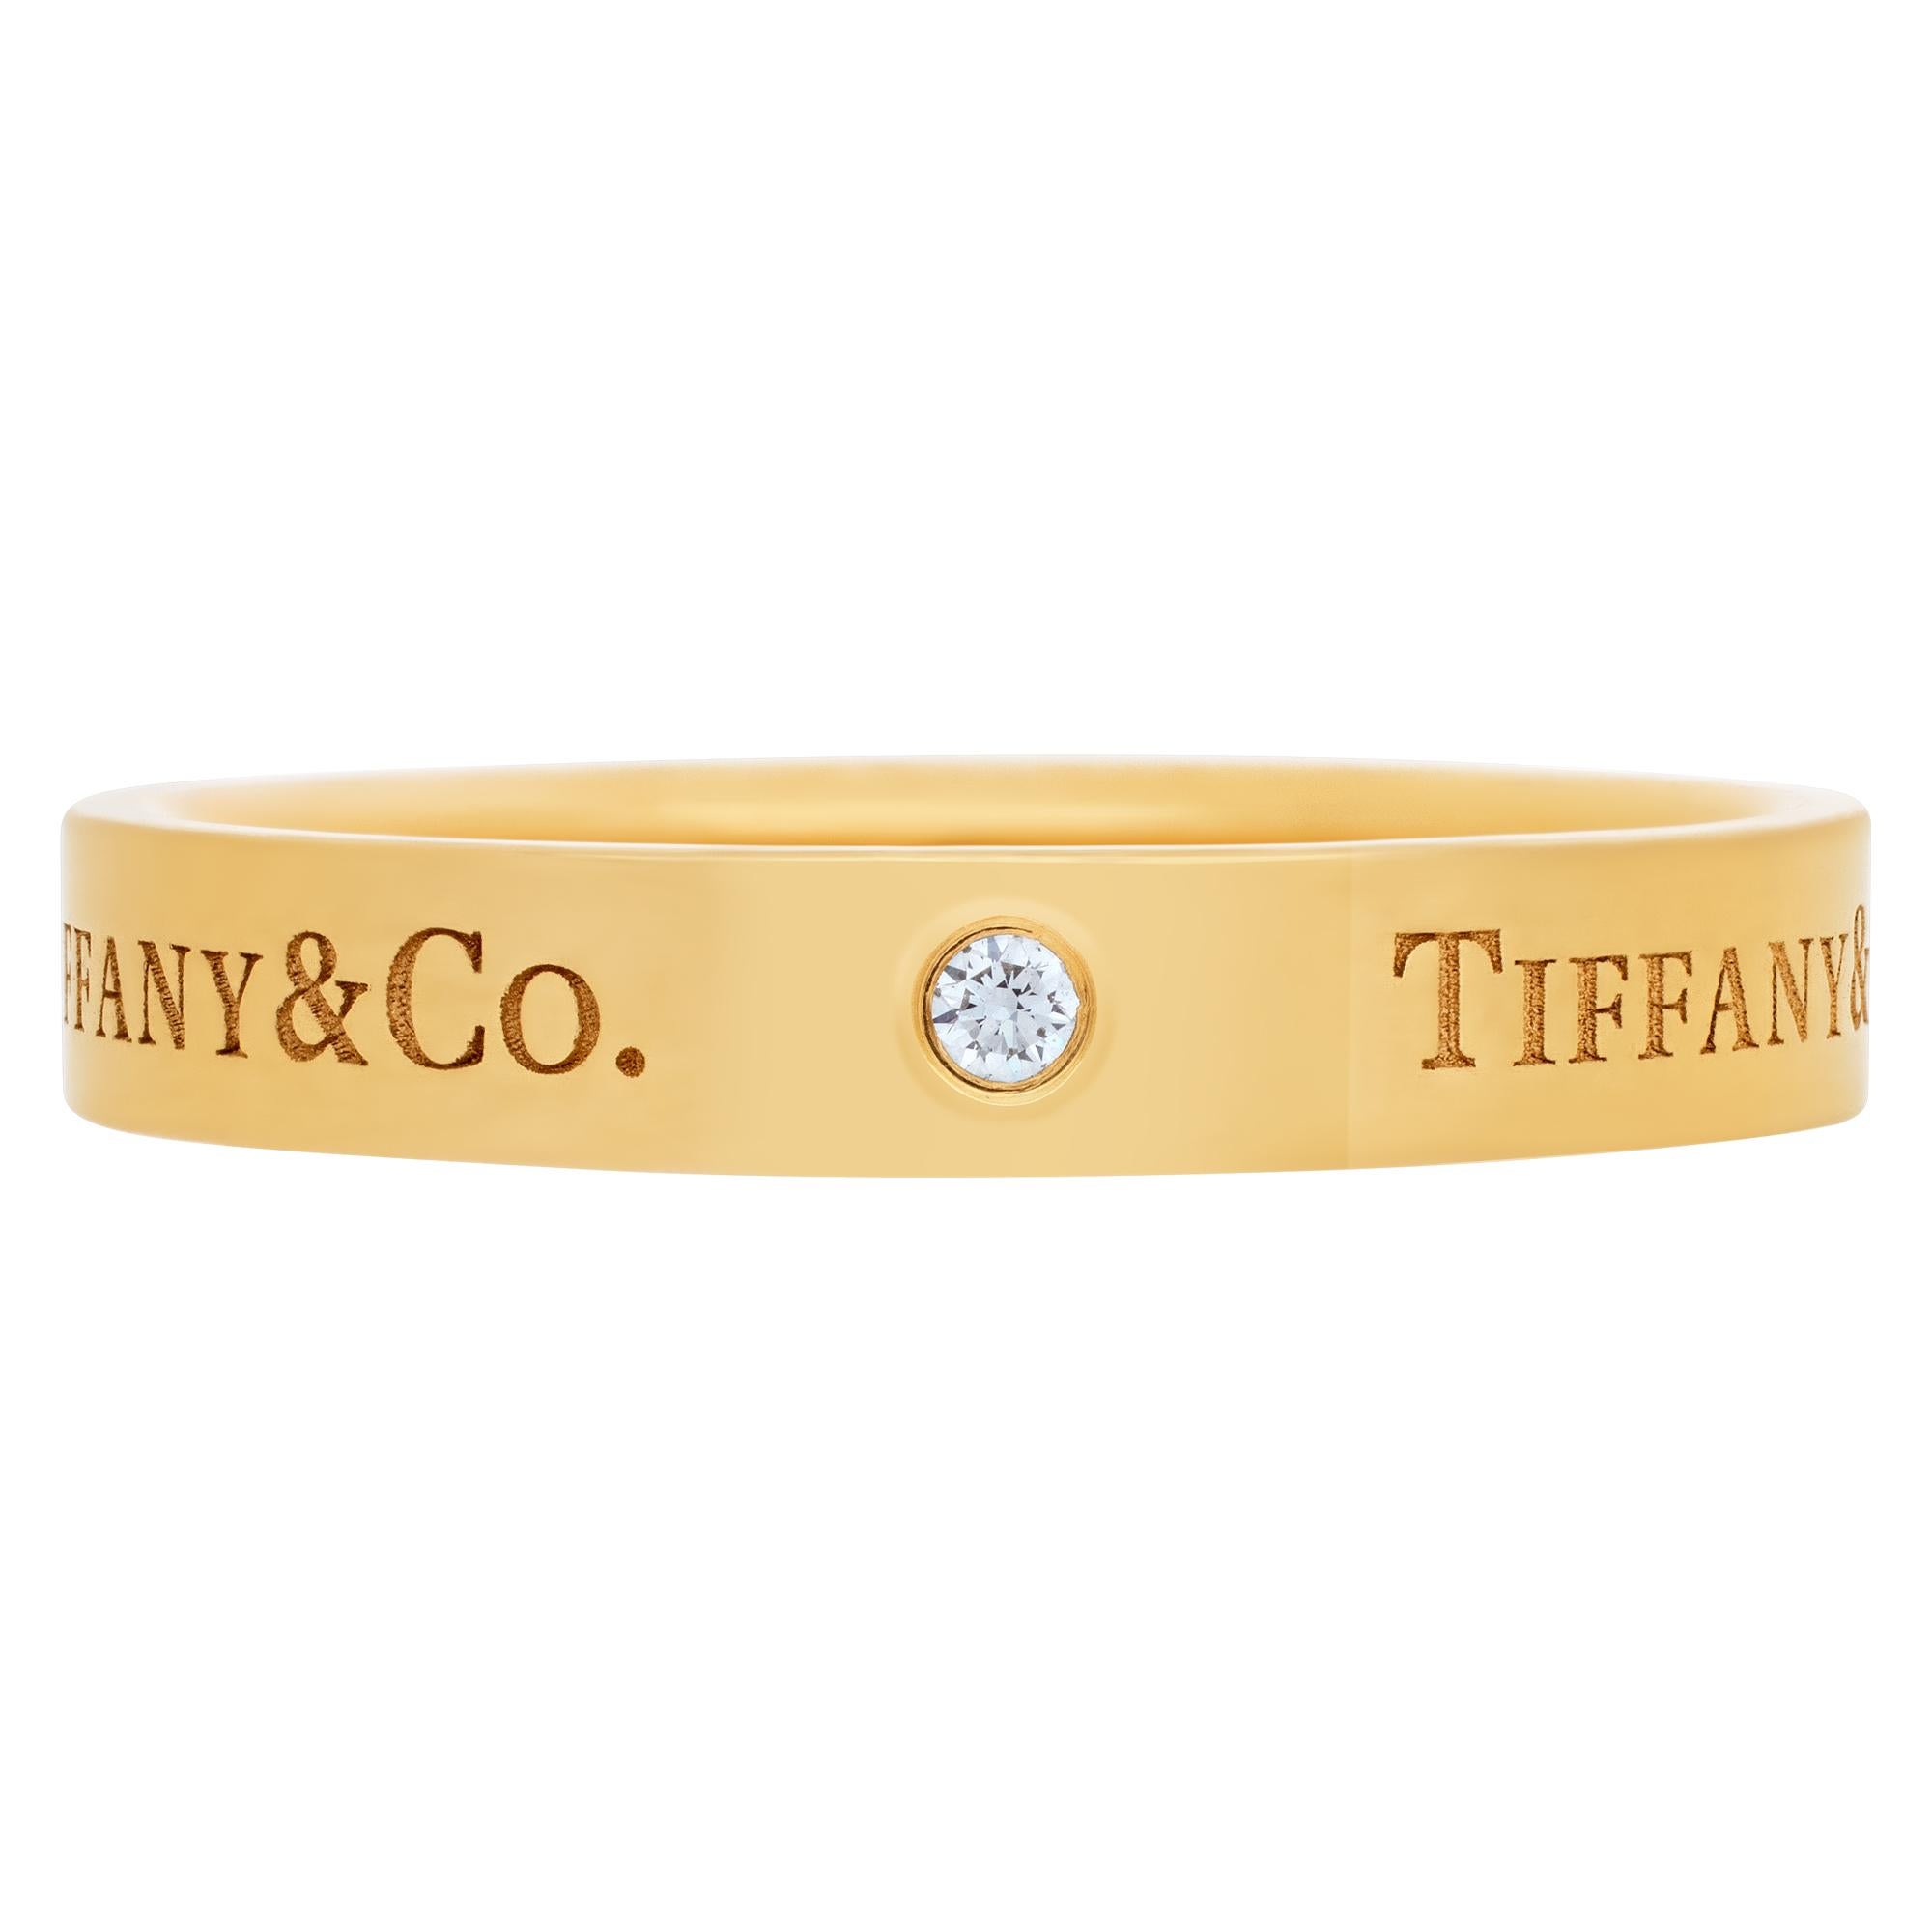 Tiffany & Co. 18k Yellow Gold Band ring with three round brilliant diamonds. 4 mm wide. Size 9.75.<br /><br />This Tiffany & Co. ring is currently size 9.75 and some items can be sized up or down, please ask! It weighs 3.7 pennyweights and is 18k.
